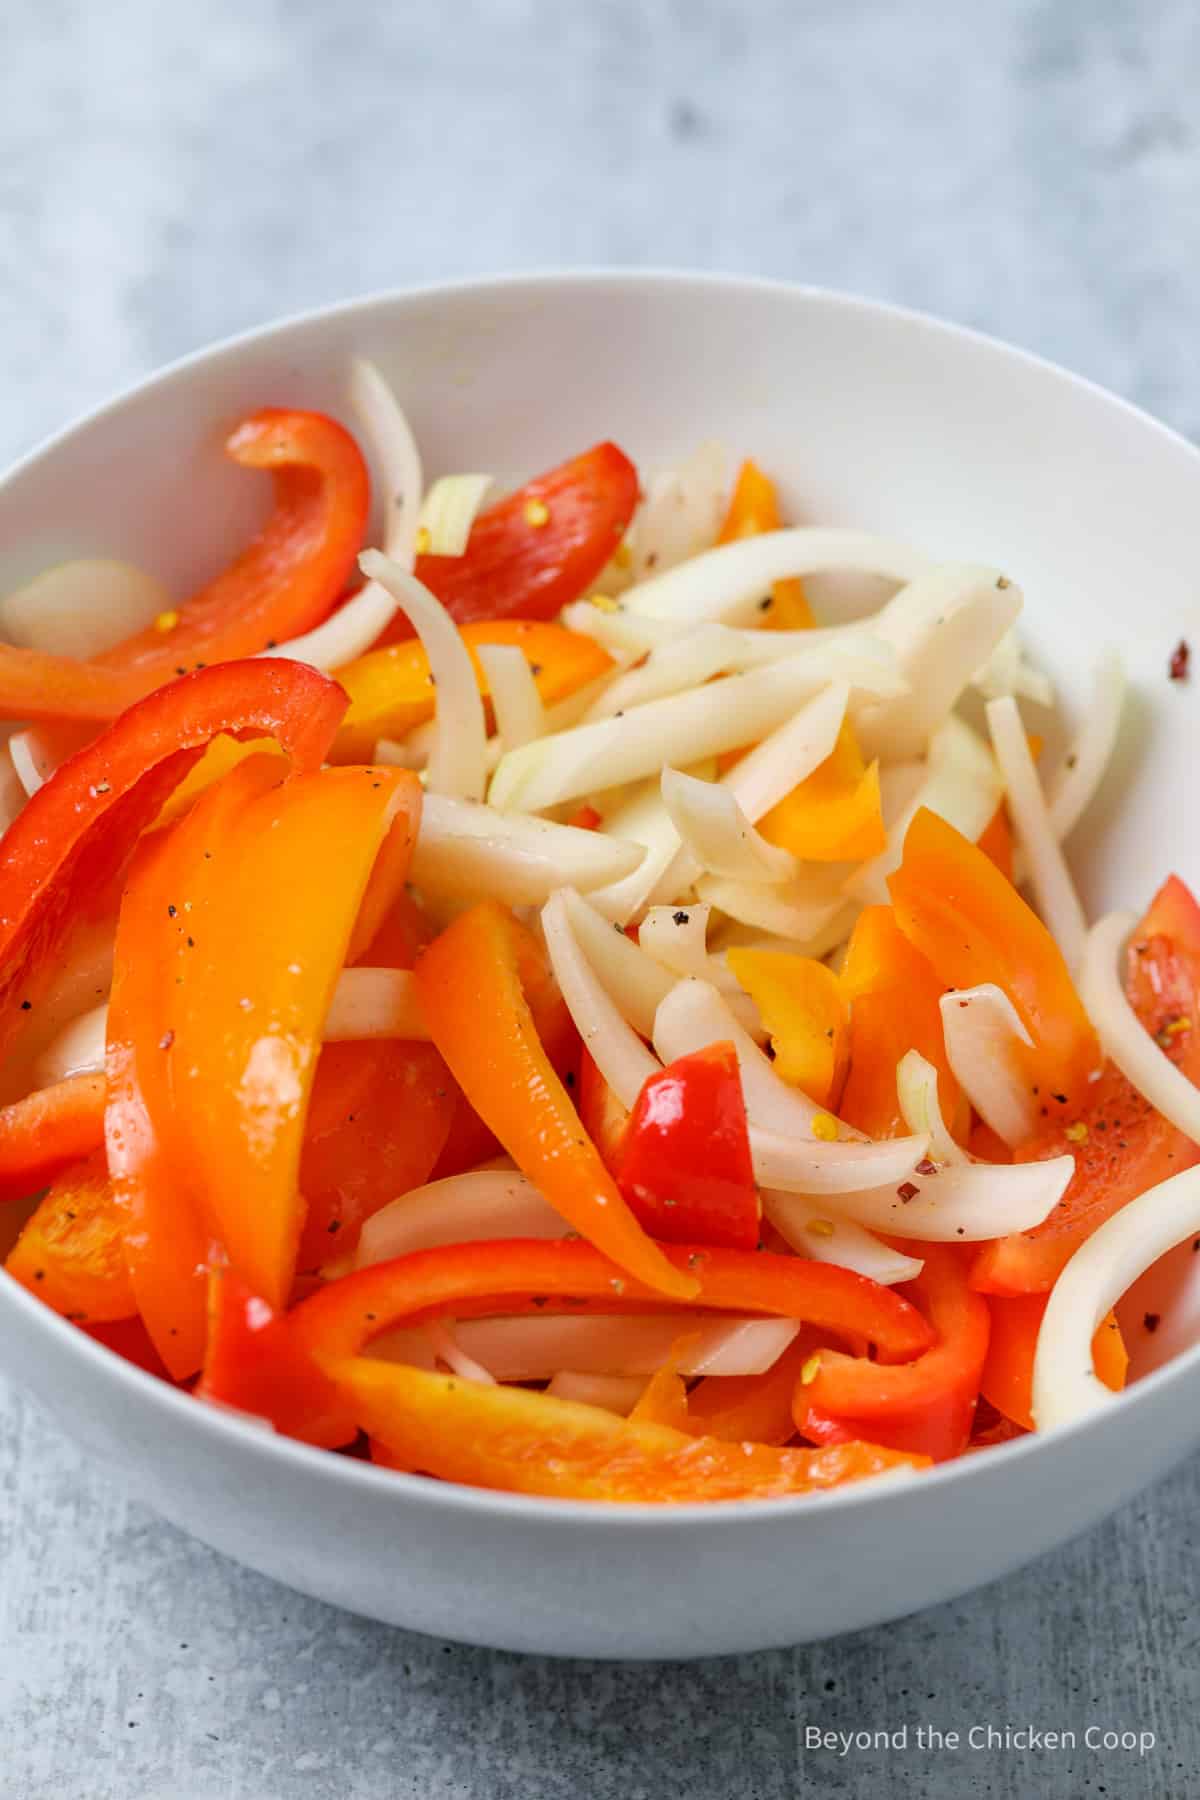 Sliced peppers and onions in a bowl.